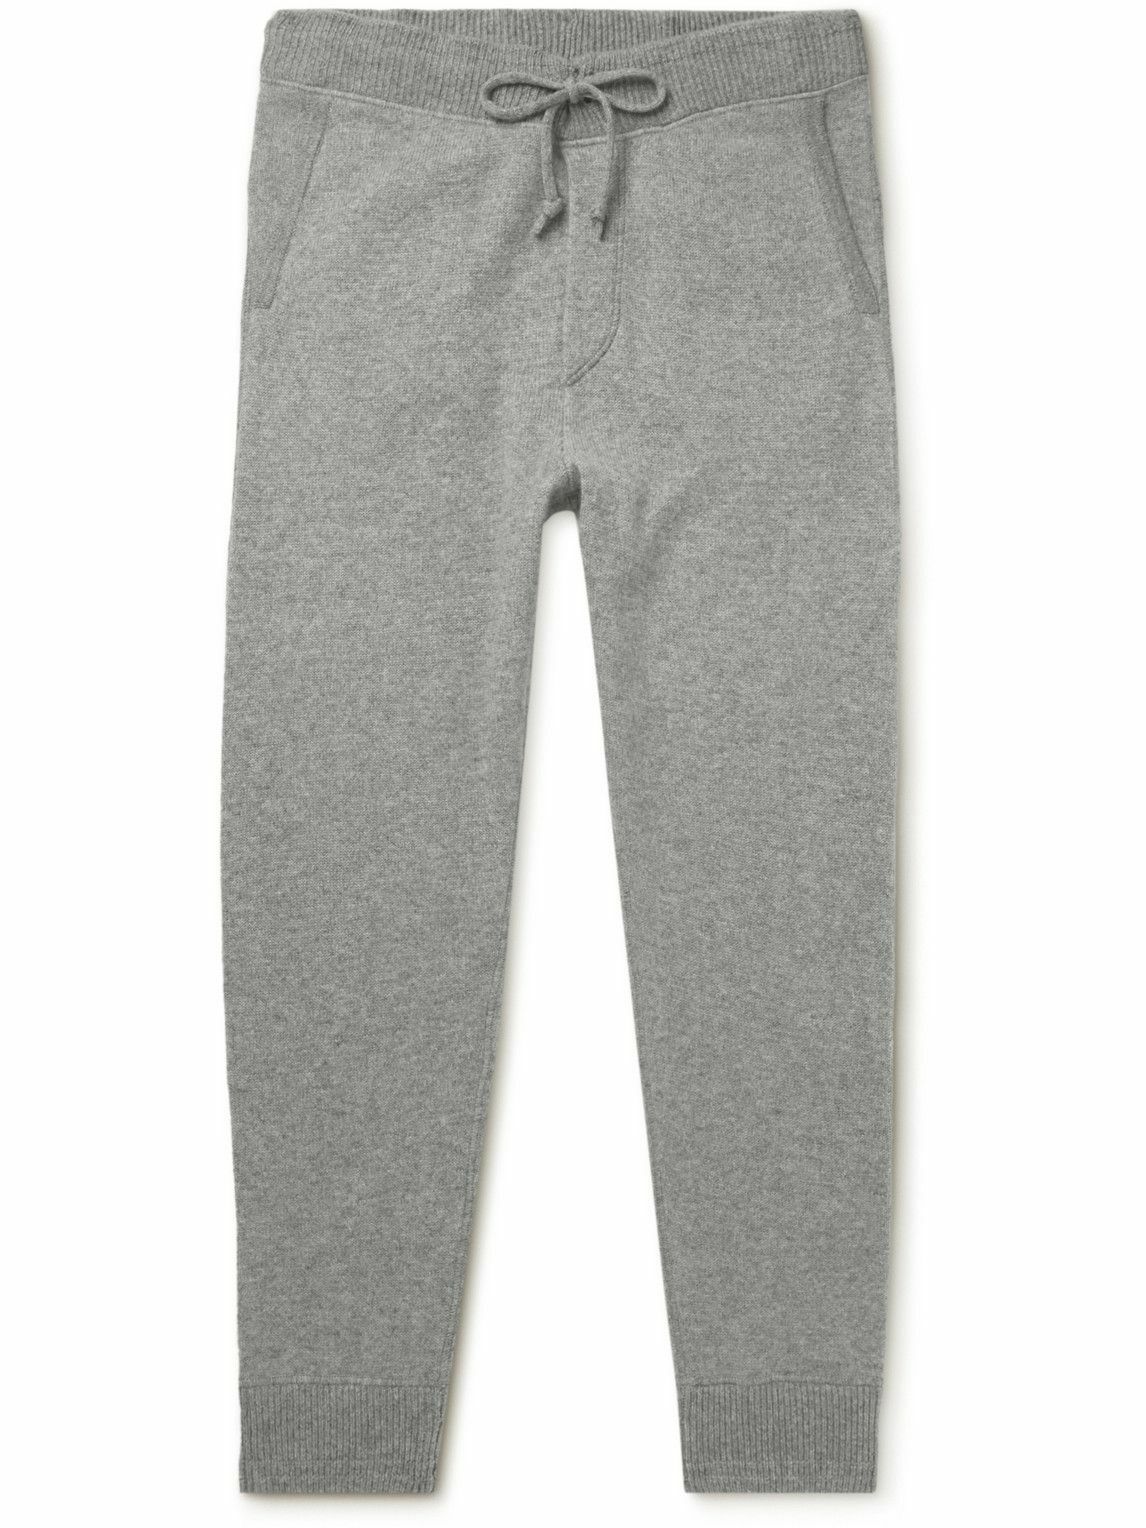 Photo: Polo Ralph Lauren - Tapered Cashmere Sweatpants - Gray